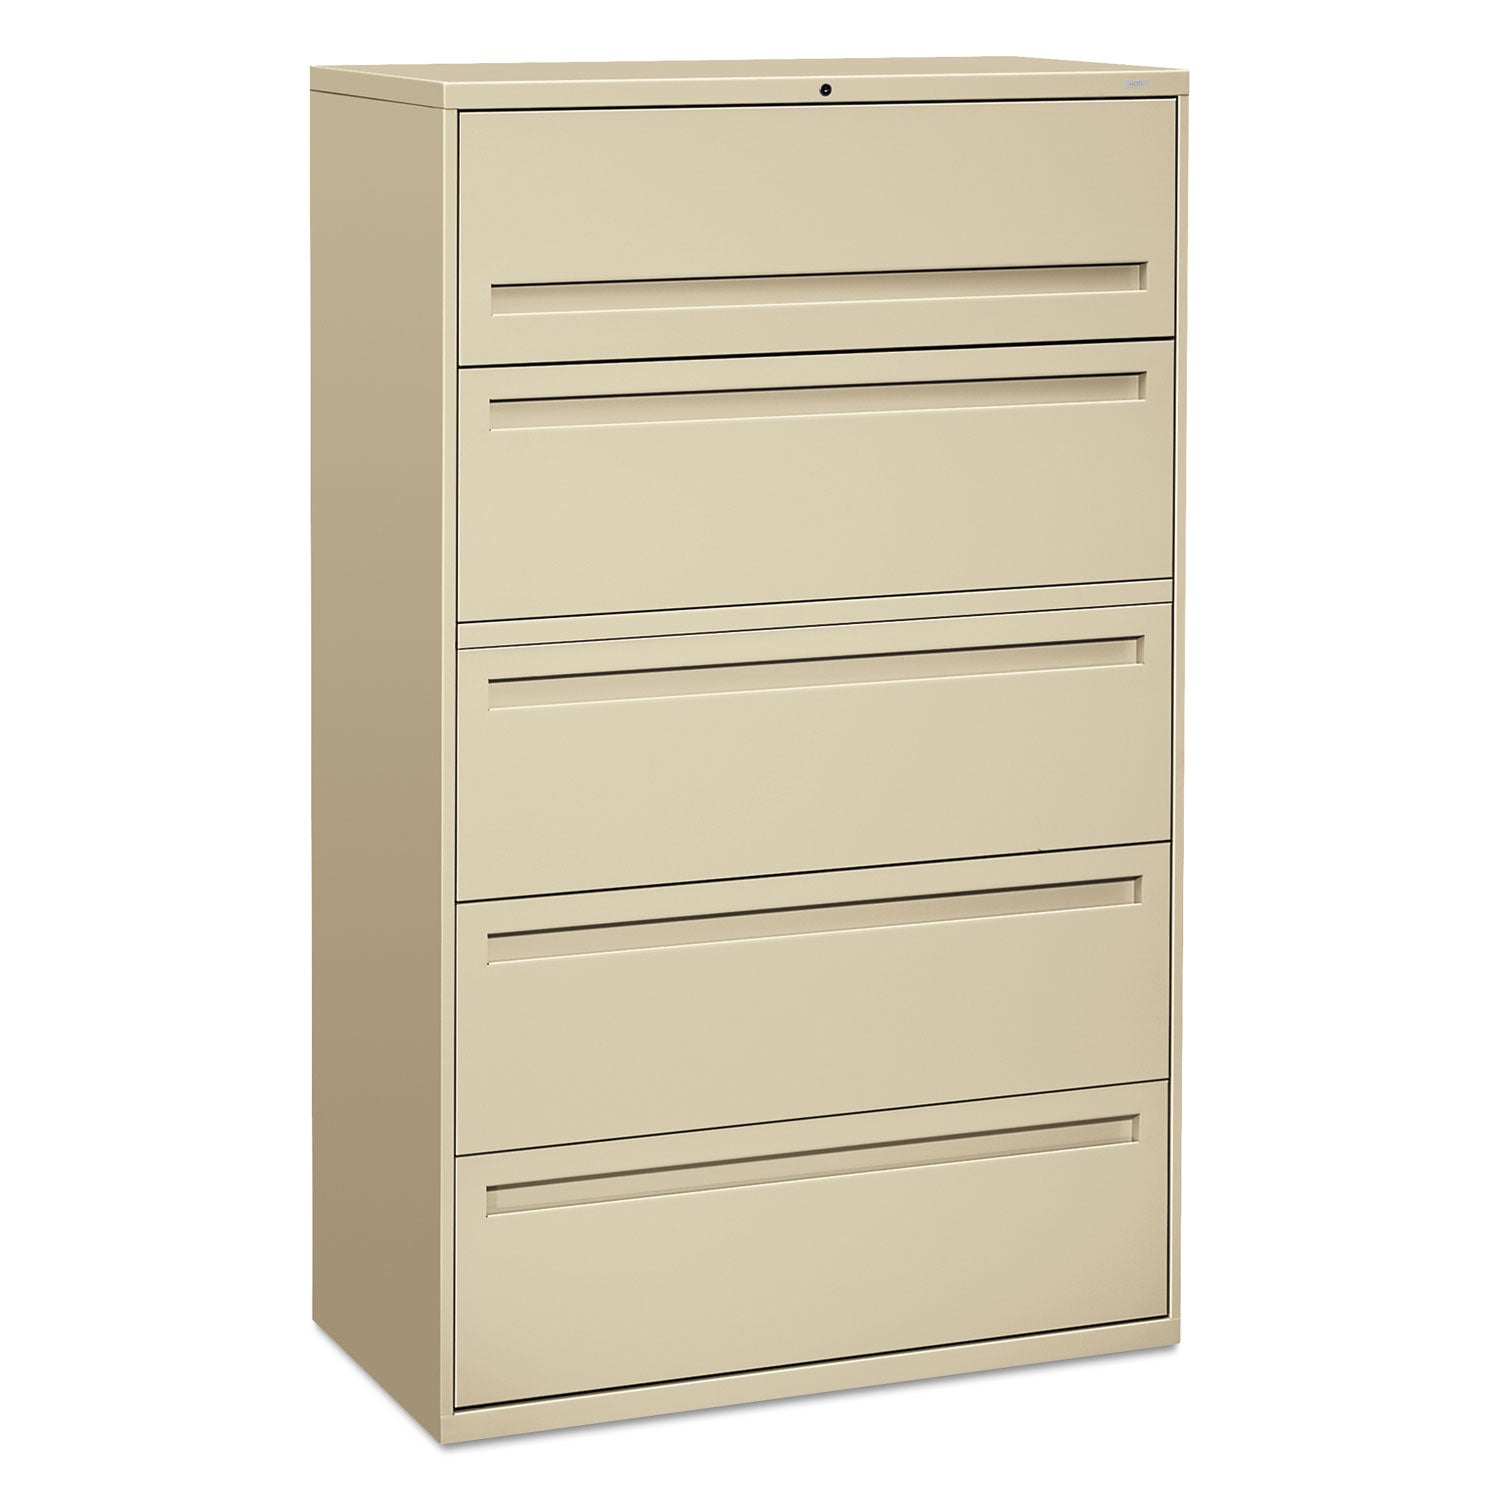 Brigade 700 Series Lateral File, 4 Legal/Letter-Size File Drawers, 1 File Shelf, 1 Post Shelf, Putty, 42